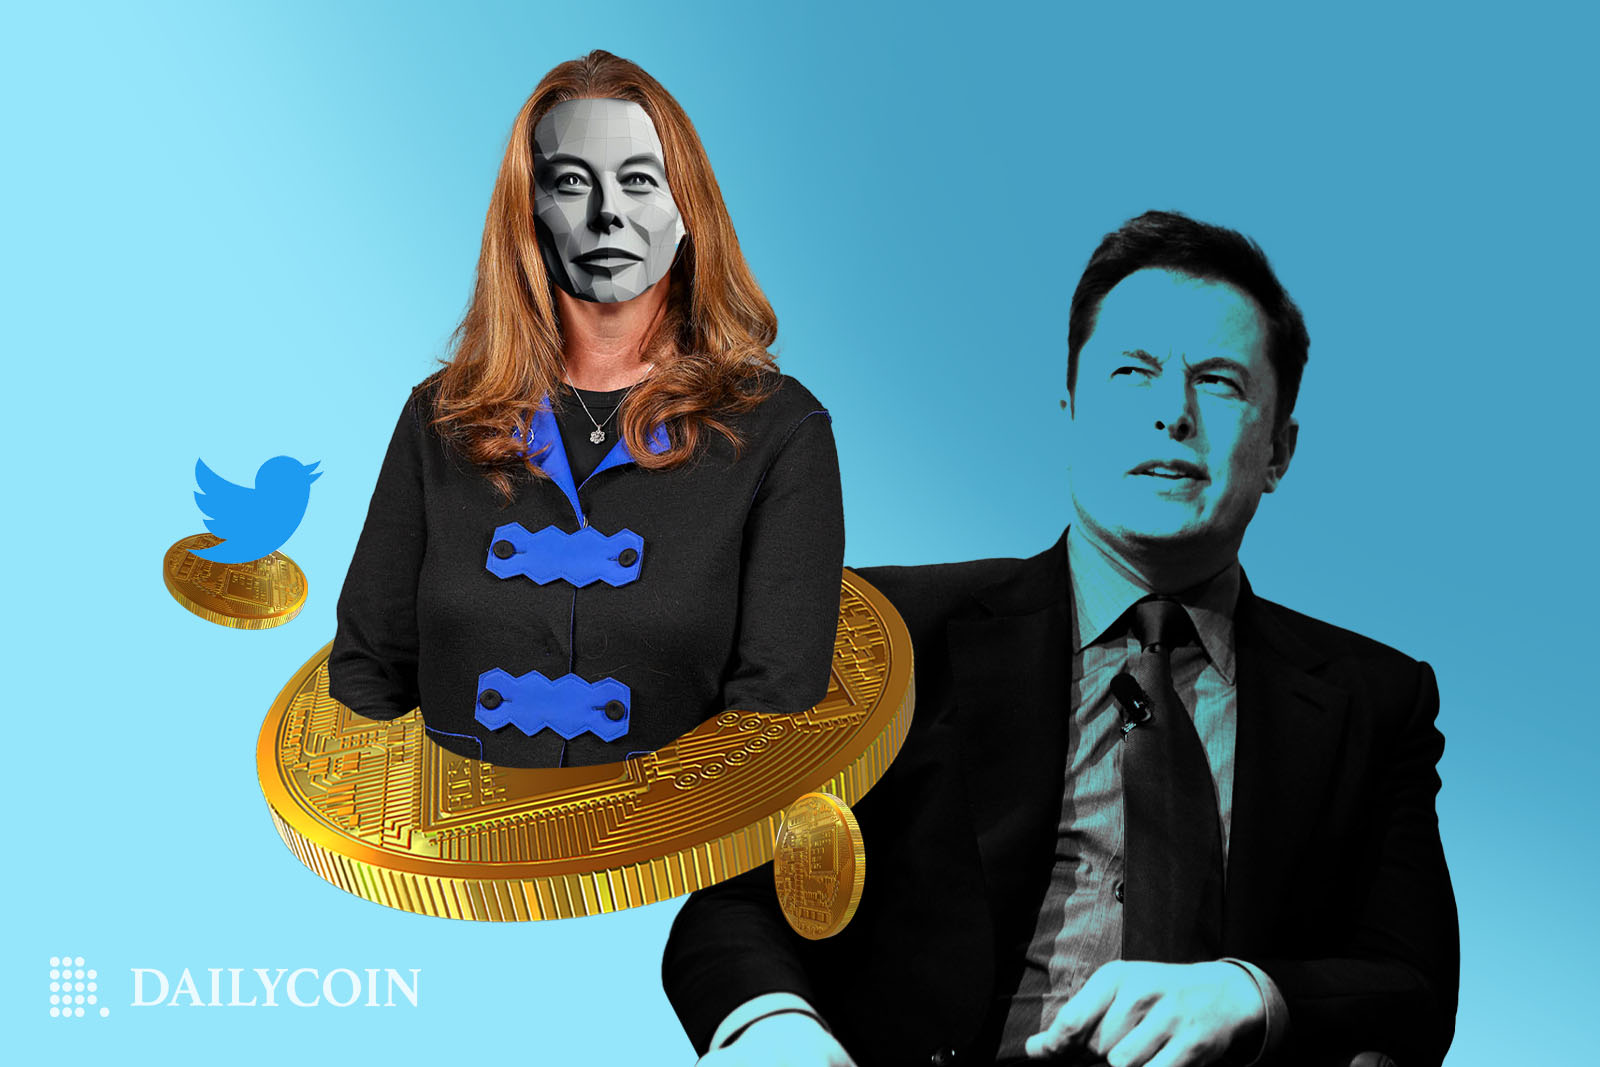 Elon Musk Imposer Hacks UK Cabinet Minister's Account, Promotes Crypto Scam